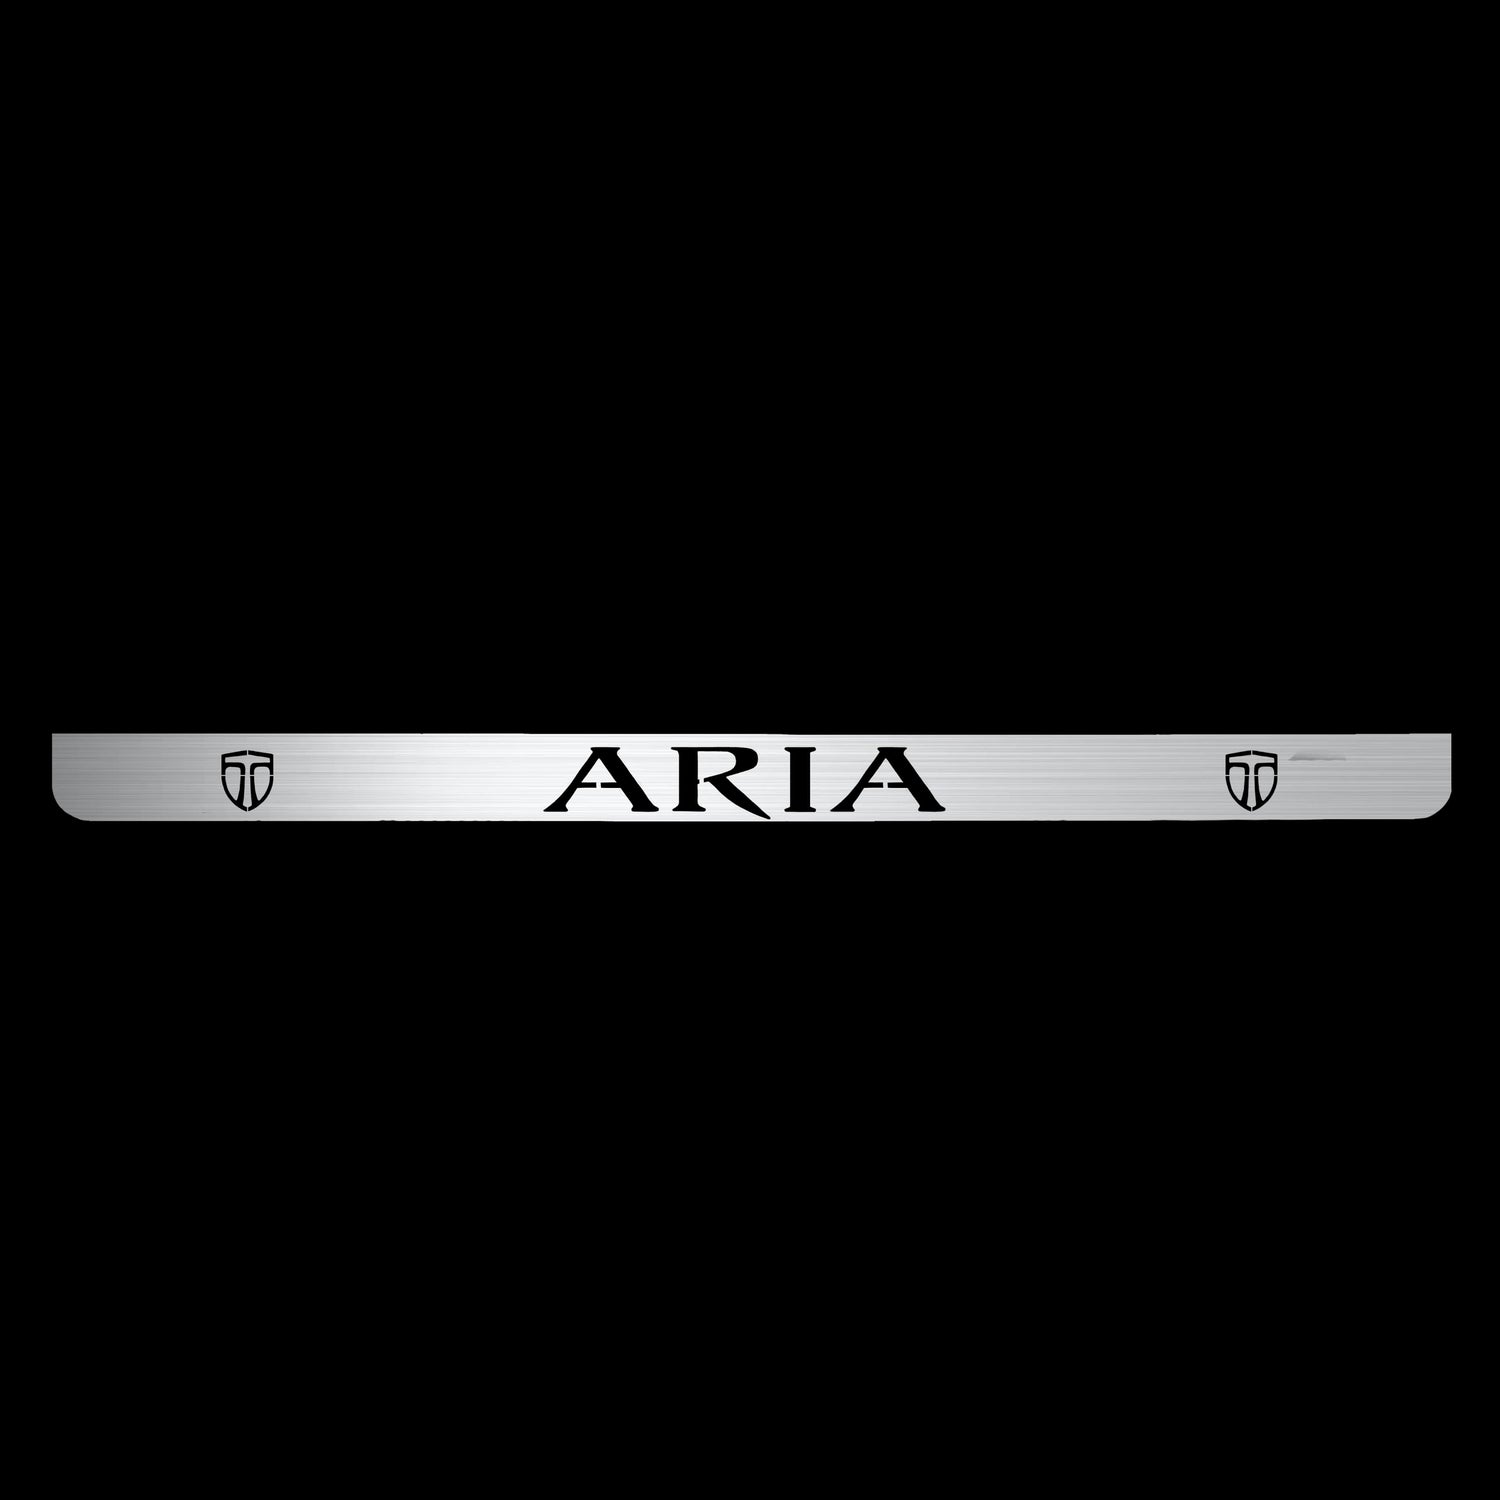 Future-Sales-Aria-Face-Plate-stainless-steel-brushed-finish-Height-6-Width-94-backer-plate-SSARIA-L-02B